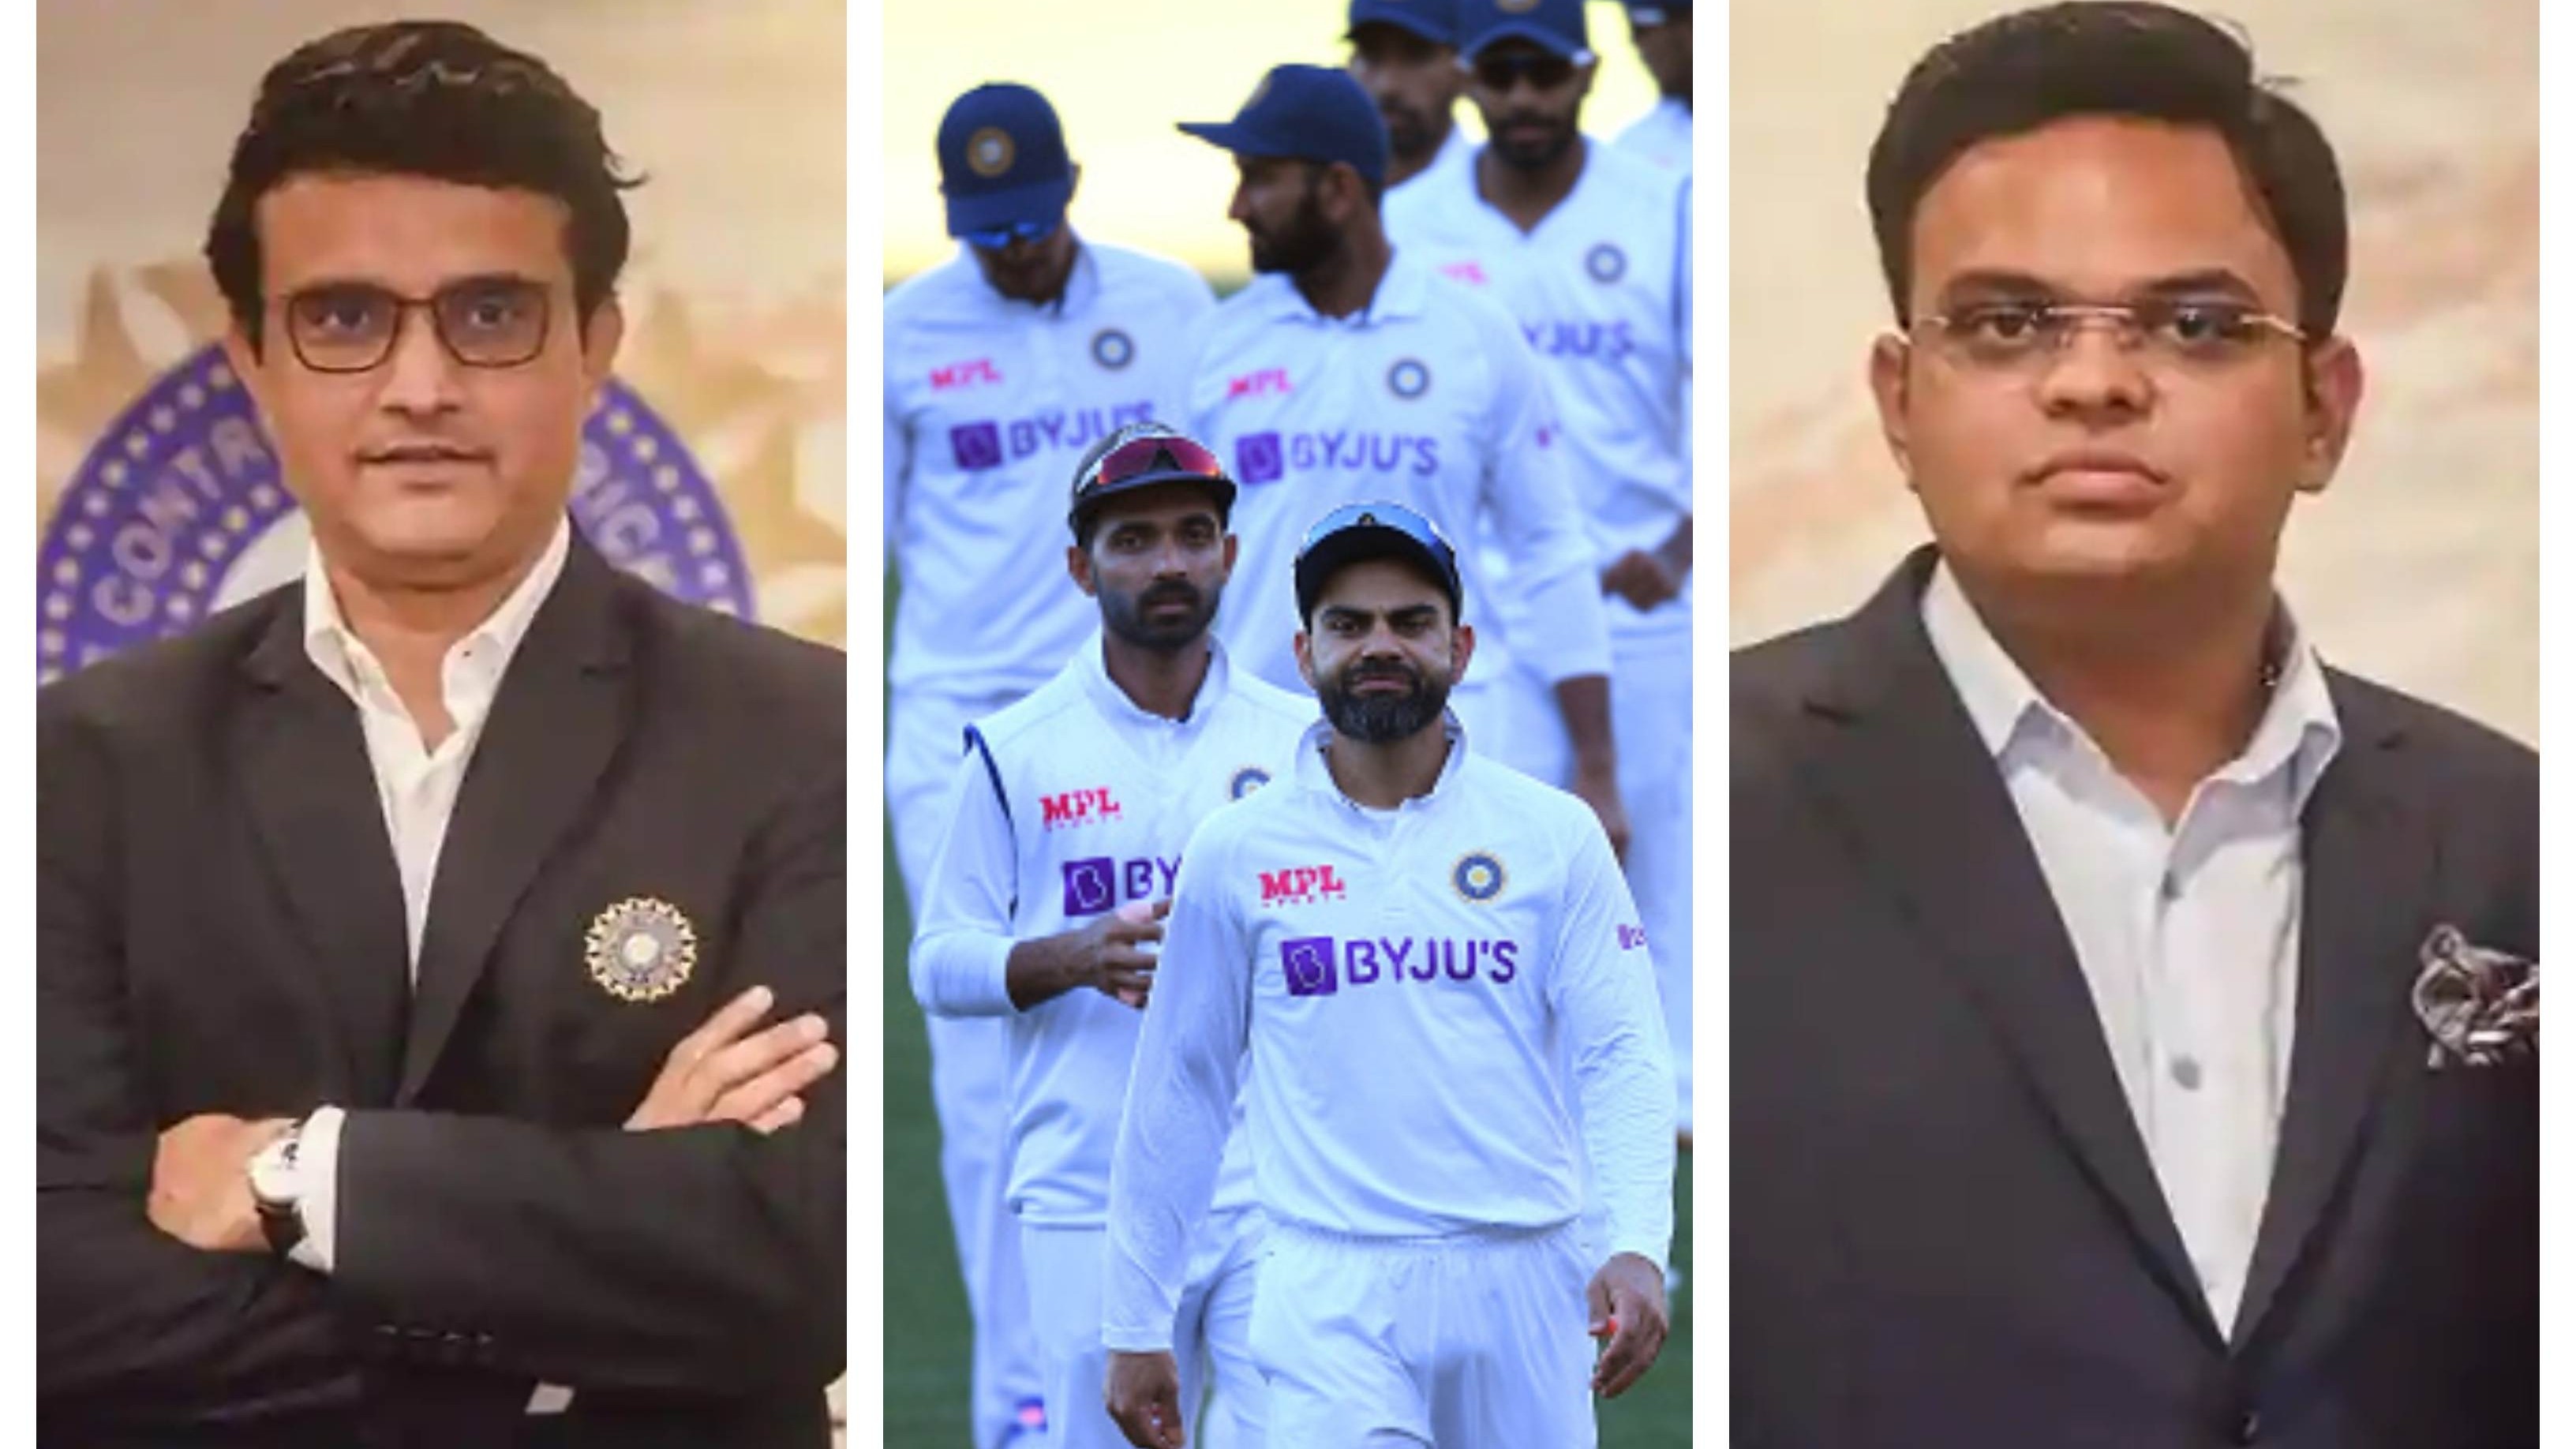 AUS v IND 2020-21: ‘Sourav Ganguly, Jay Shah working on plans to improve India’s performance’ – Rajeev Shukla